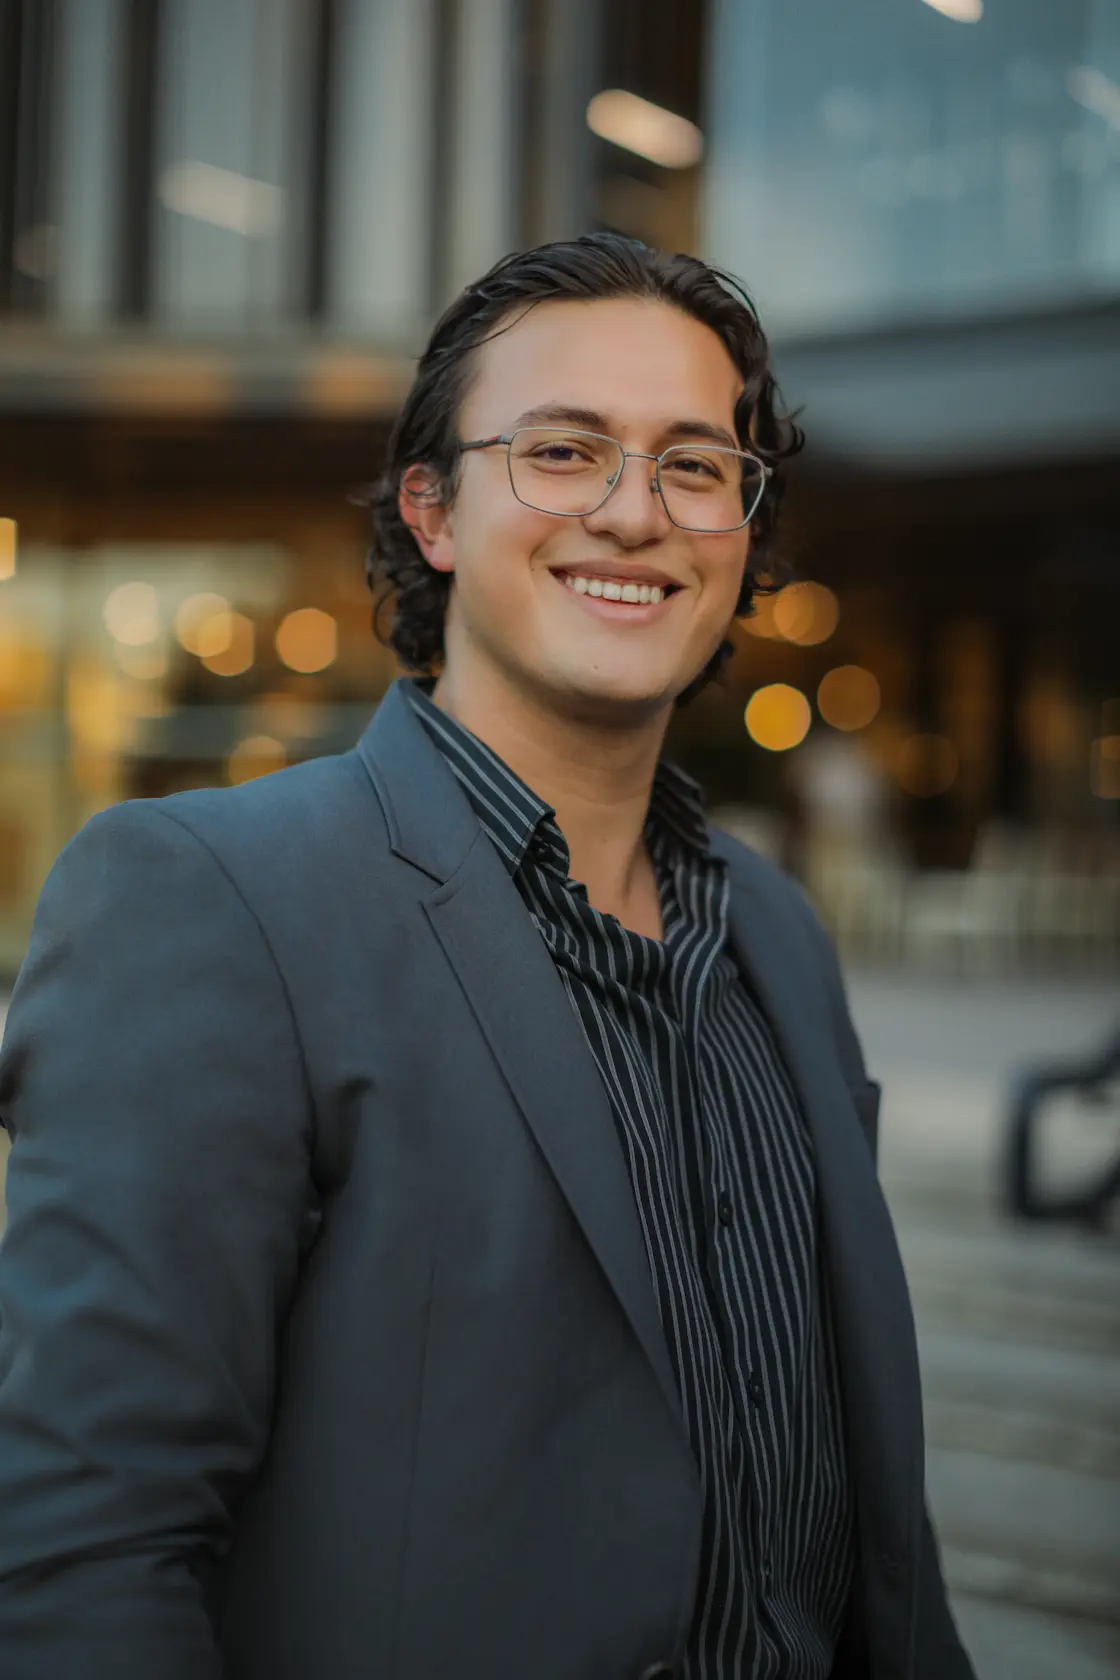 Jason Rojas - CEO and Co-Founder of JRC Consulting